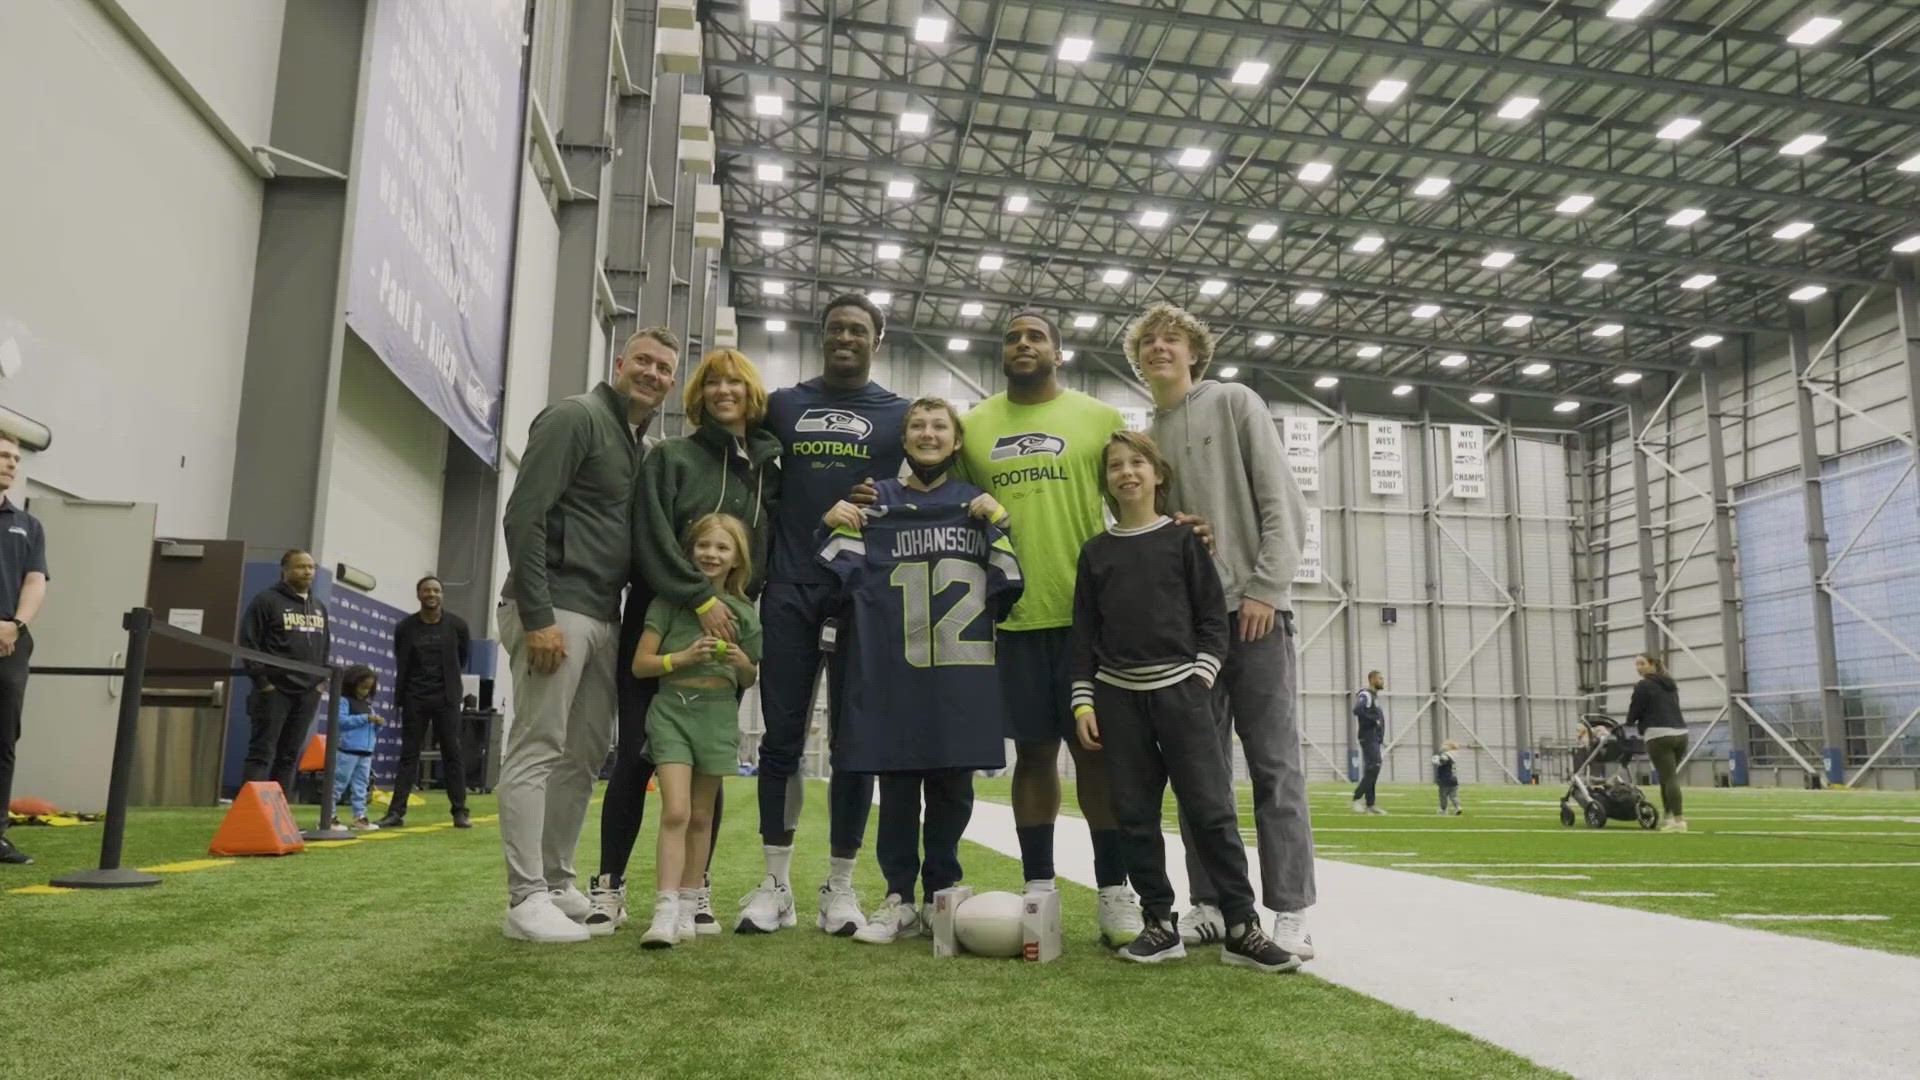 Last October, Seattle Seahawks fan Gus was battling cancer. On Sunday, he will raise the 12th Man flag at the Hawks' home game as an honorary team captain.